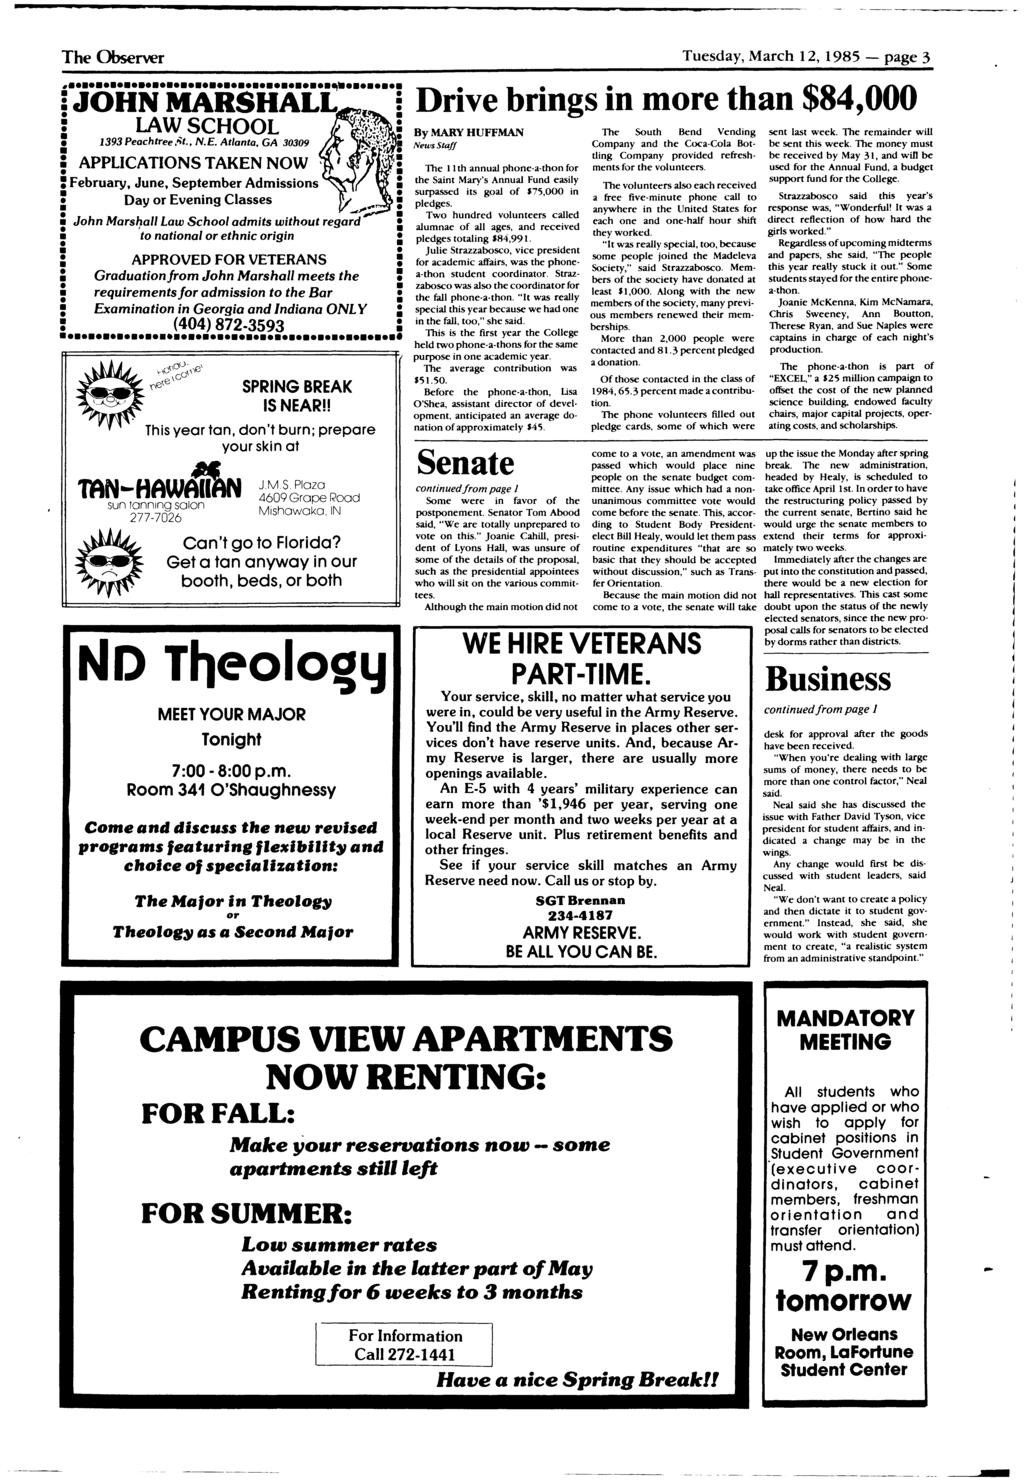 - --------- The Observer Tuesday, March 12, 1985 - page 3 SPRNG BREAK S NEAR! This year an, don' burn; prepare your skin a 'mn-hawa1ijvi sun ann1ng solon 277-7026 J.M.S. Plaza 4609 Grope Rood Mishawaka.